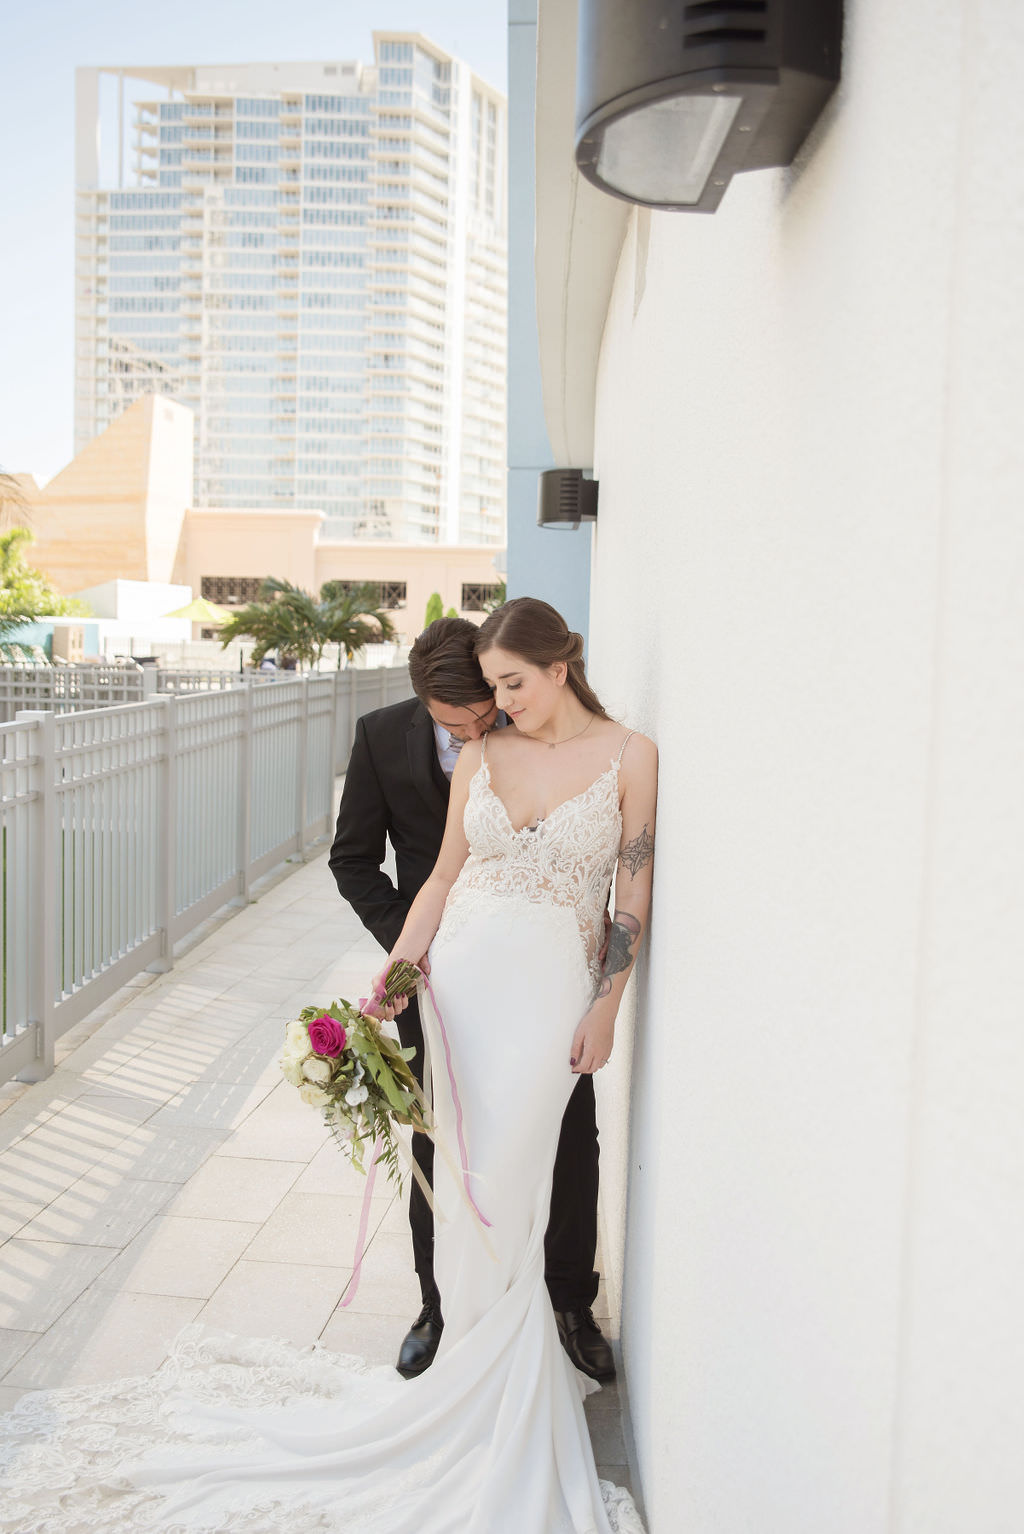 Bride in Low V Neckline Lace and Illusion with Spaghetti Straps Wedding Dress | Tampa Wedding Dress Shop Nikki's Glitz and Glam Bridal Boutique | Tampa Bay Wedding Photographer Kristen Marie Photography | Hyatt Place Downtown St. Pete Wedding Venue